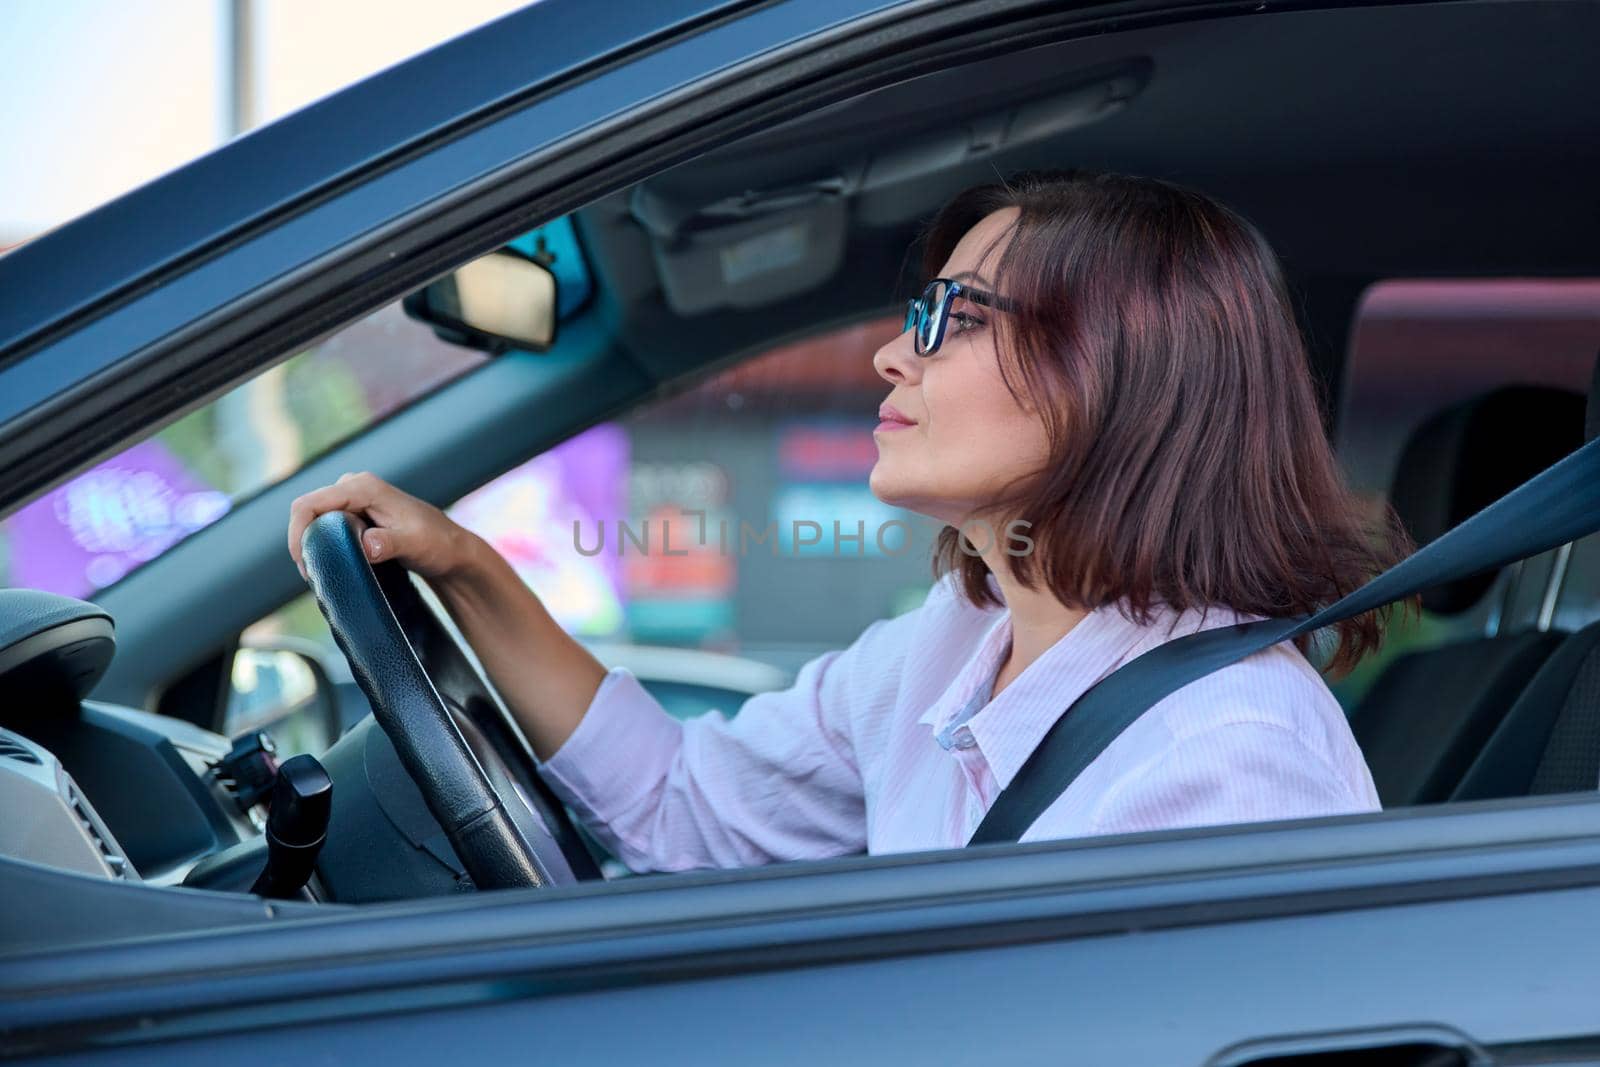 Middle-aged woman driver driving a car. Beautiful adult female with glasses, lifestyle, people, transport concept